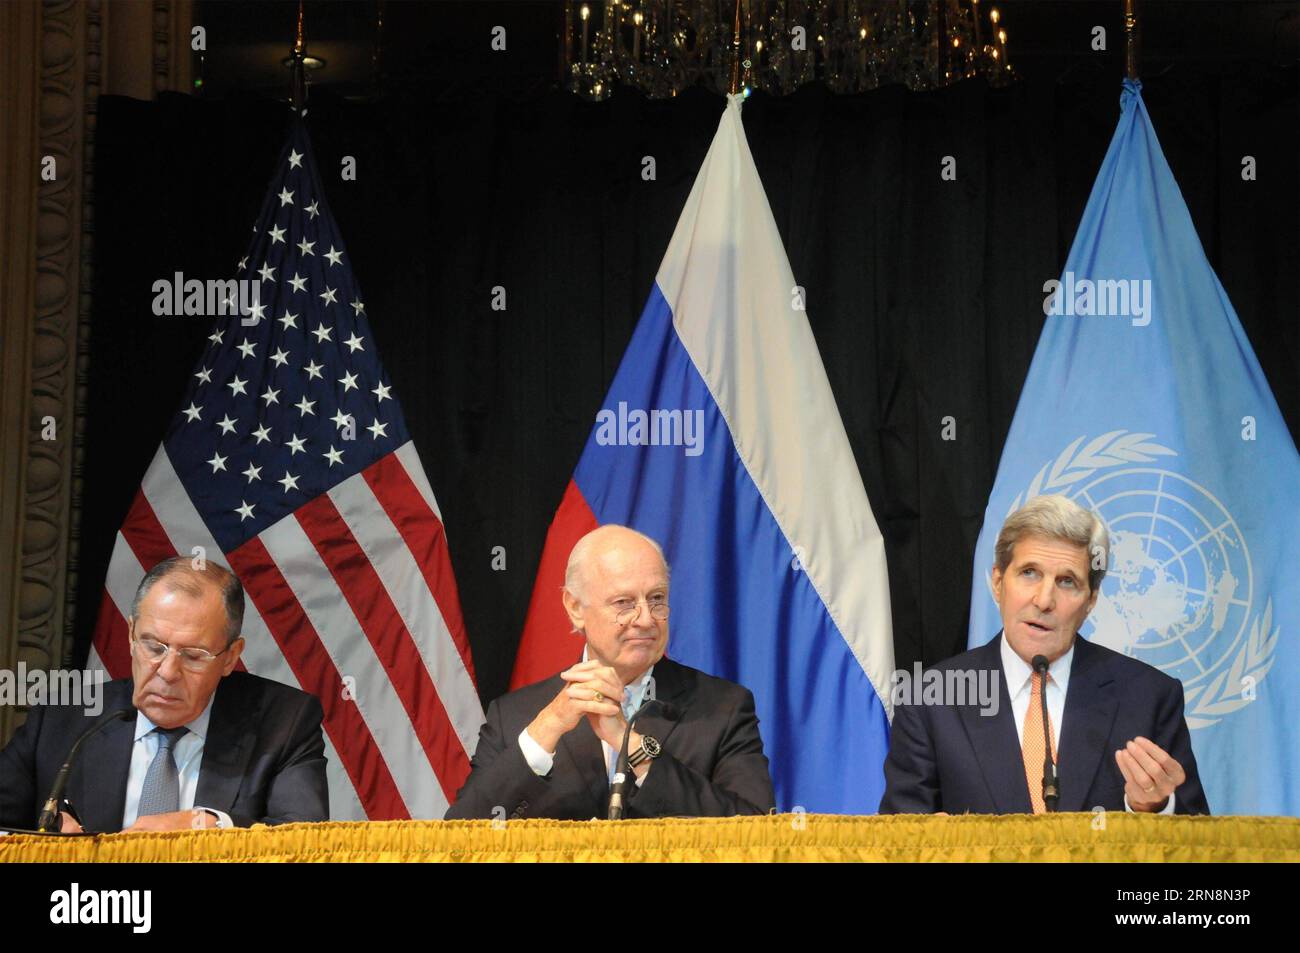 (151030) -- VIENNA, Oct. 30, 2015 -- Russian Foreign Minister Sergei Lavrov, United Nations Special Envoy for Syria Staffan de Mistura and U.S. Secretary of State John Kerry (L to R) attend a press conference after the meetings of Vienna talks in Vienna, Austria, Oct. 30, 2015. There is still no agreement reached over the future of Syrian President Bashar al-Assad yet, Russian Foreign Minister Sergei Lavrov on Friday told reporters after the meetings in Vienna. )(wr) AUSTRIA-VIENNA-VIENNA TALKS-SYRIA CRISIS LiuxXiang PUBLICATIONxNOTxINxCHN   Vienna OCT 30 2015 Russian Foreign Ministers Sergei Stock Photo